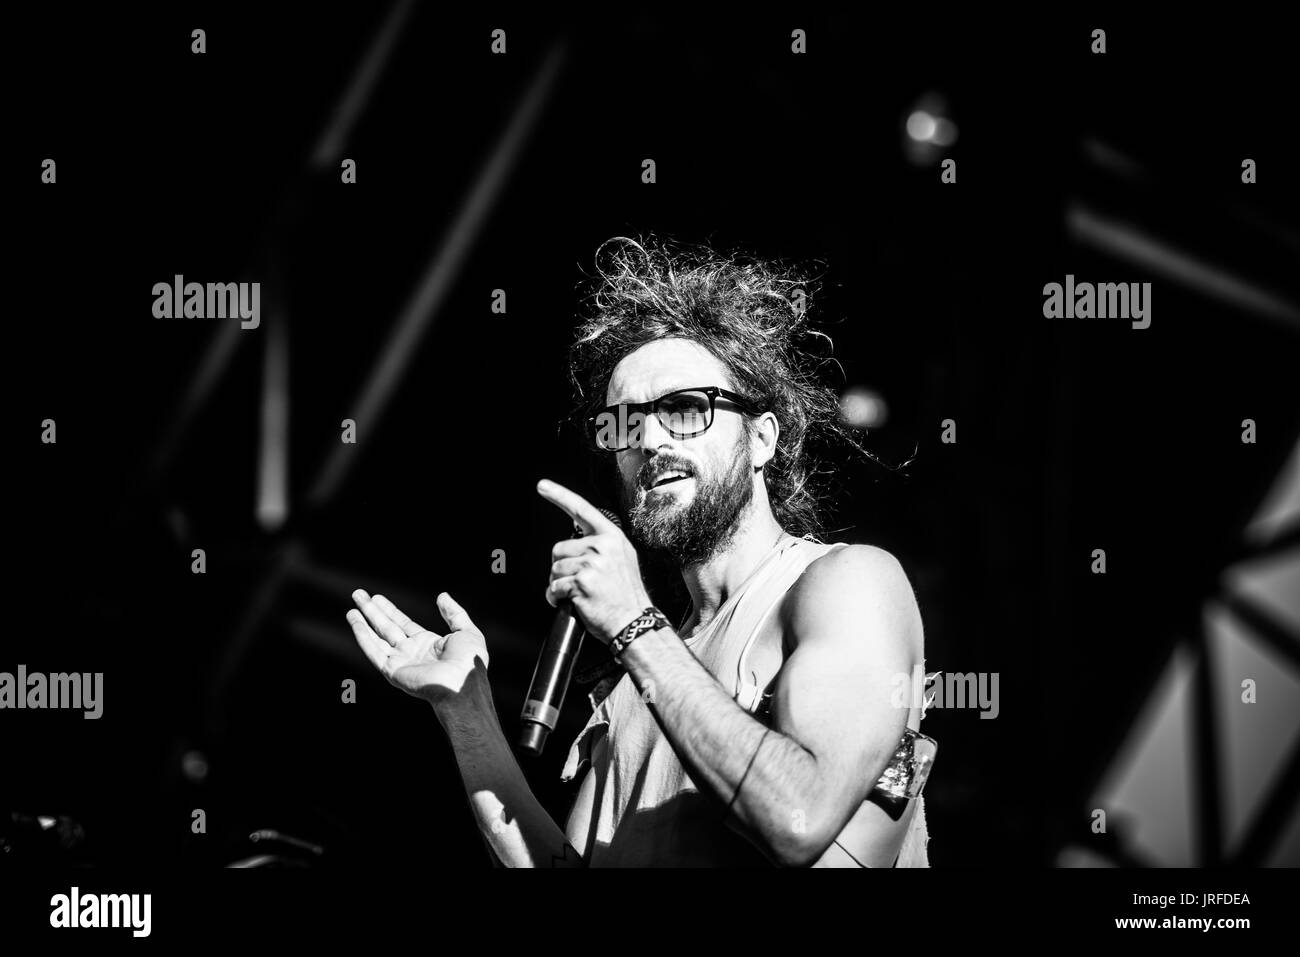 Edward Sharpe and the Magnetic Zeros performing at a music festival in British Columbia Canada in black and white. Stock Photo